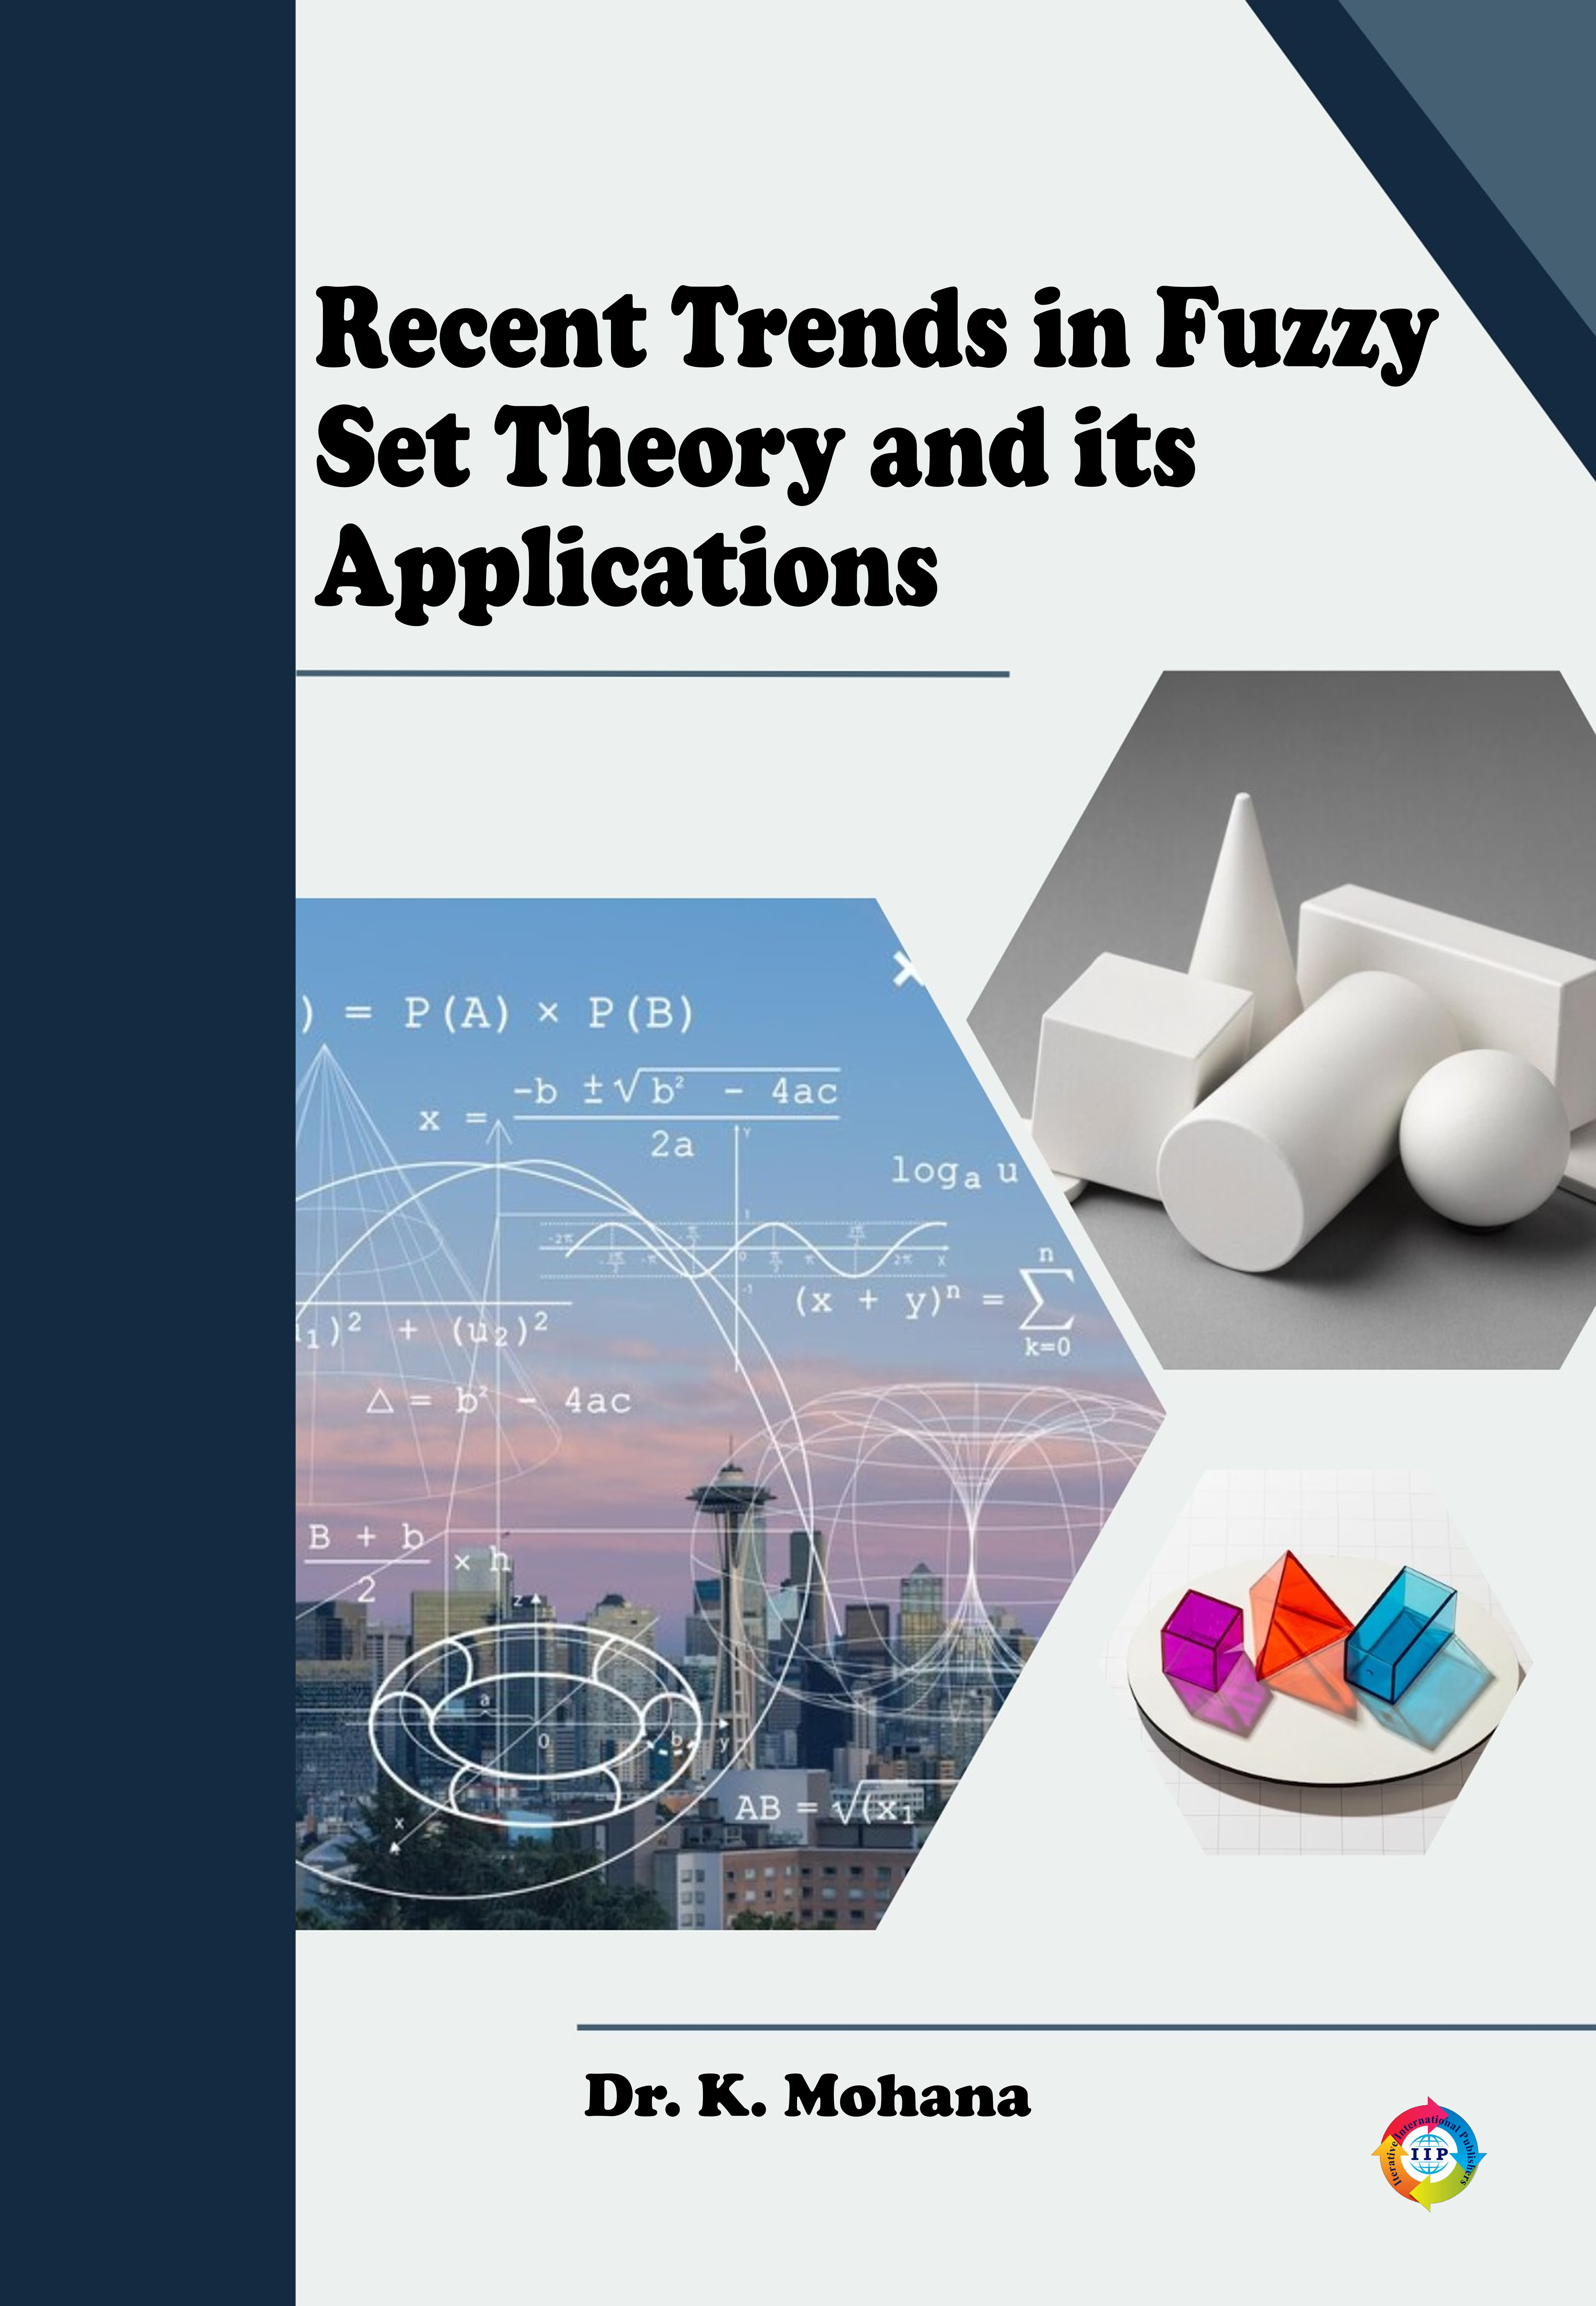 Recent Trends in Fuzzy Set Theory and its Applications